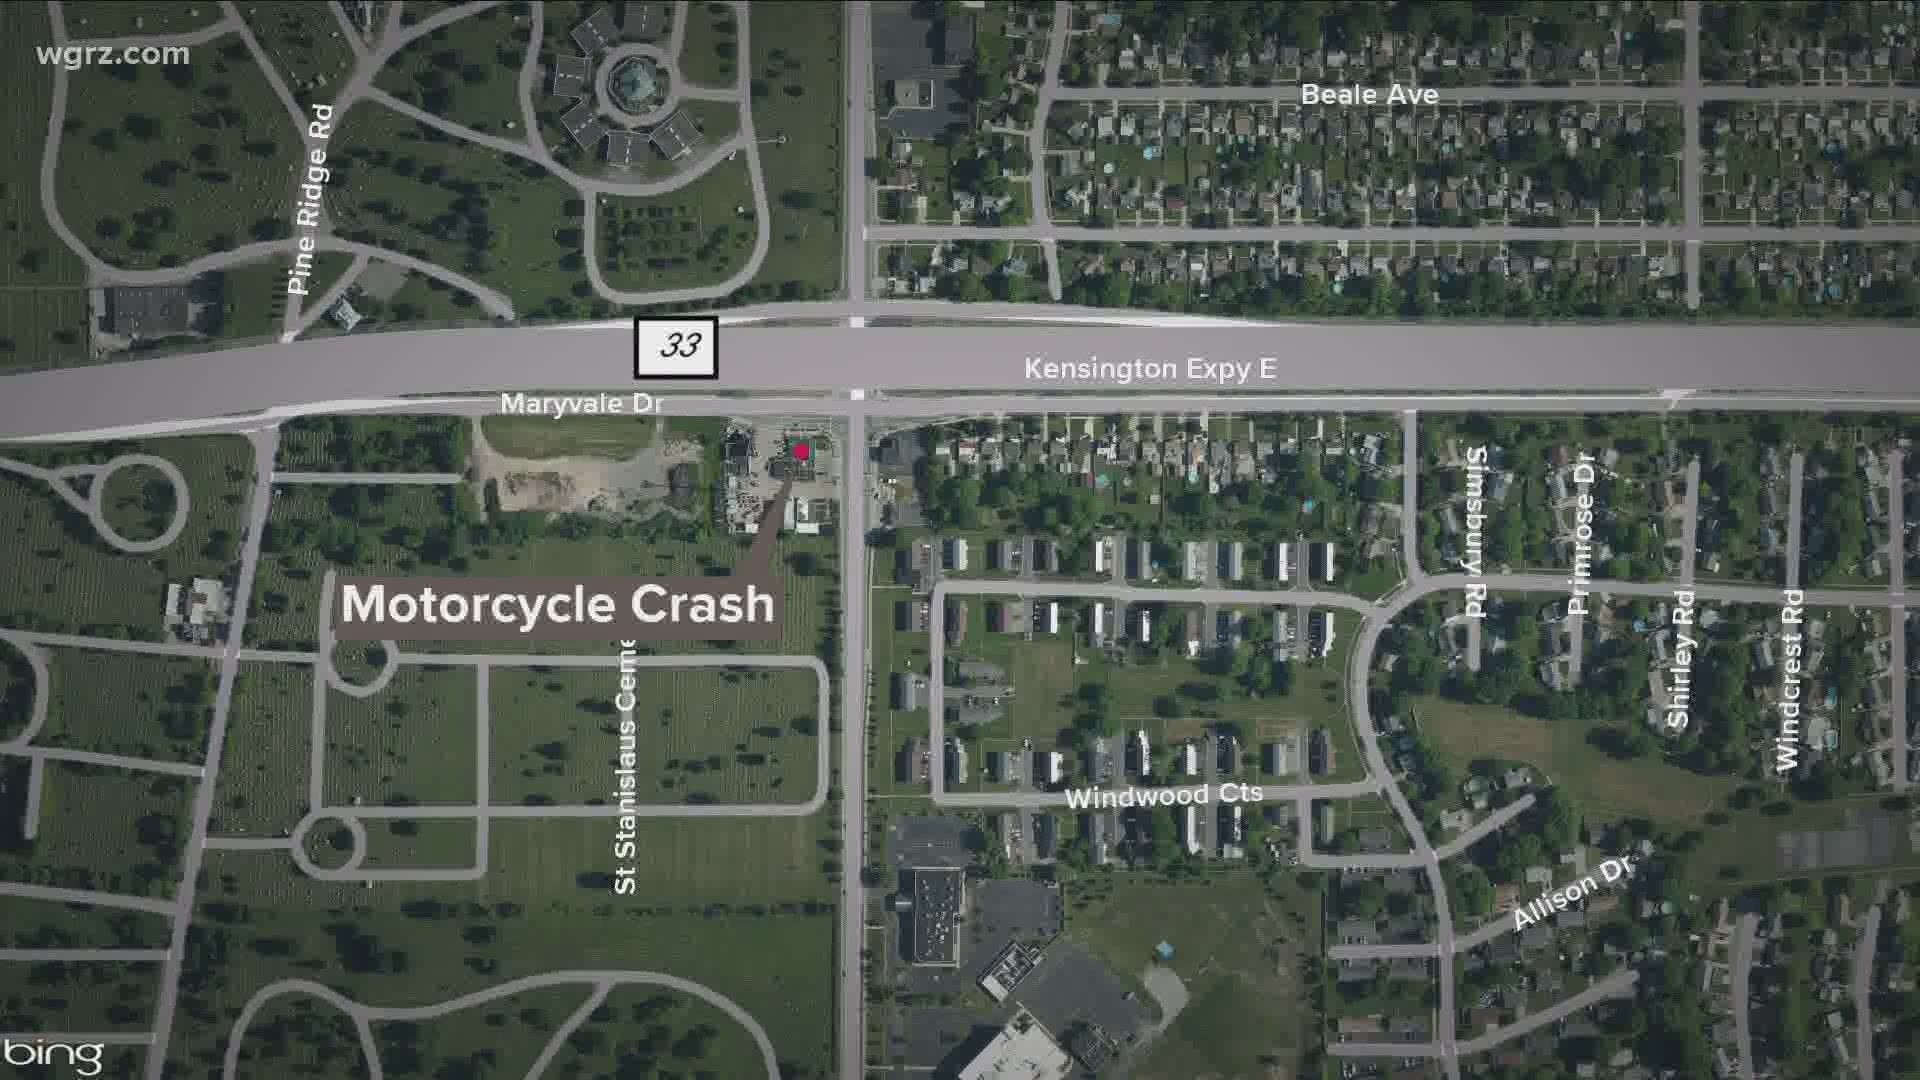 A 37-year-old Cheektowaga man died Saturday after he was thrown from his motorcycle. Cheektowaga police say the man hit a car near Harlem Road and Maryvale Drive.